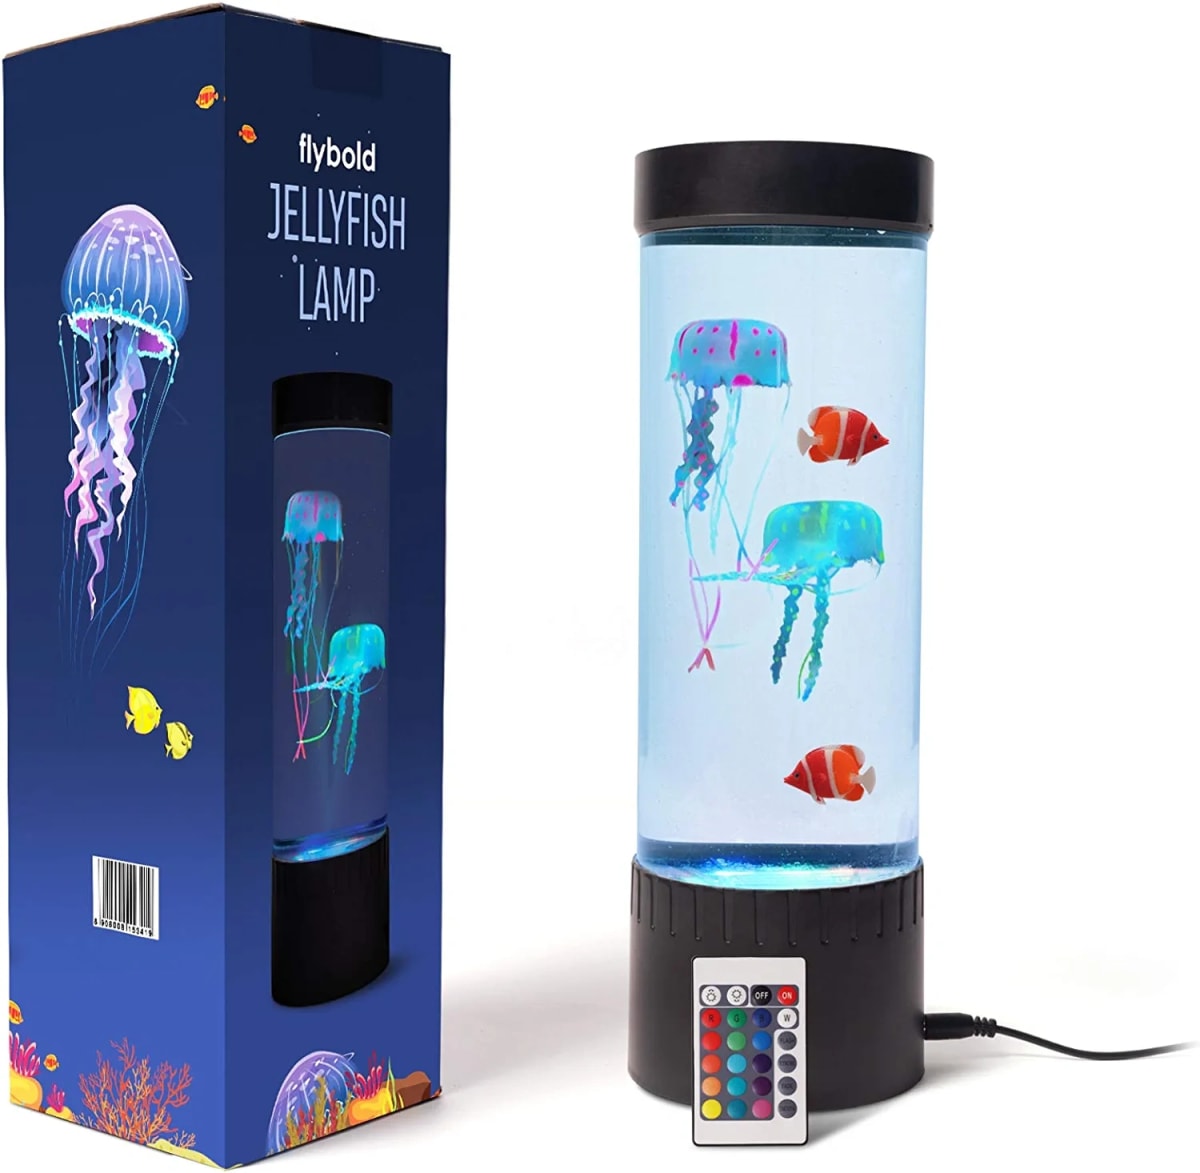 Jellyfish Lamp Jellyfish Lava Lamp Led with 20 Color Changing Light 2 Clownfish 2 Jelly Fish Lamp Remote for Live Jellyfish Aquarium Lamp Night Light Mood Desk Decor for Kids Bedroom